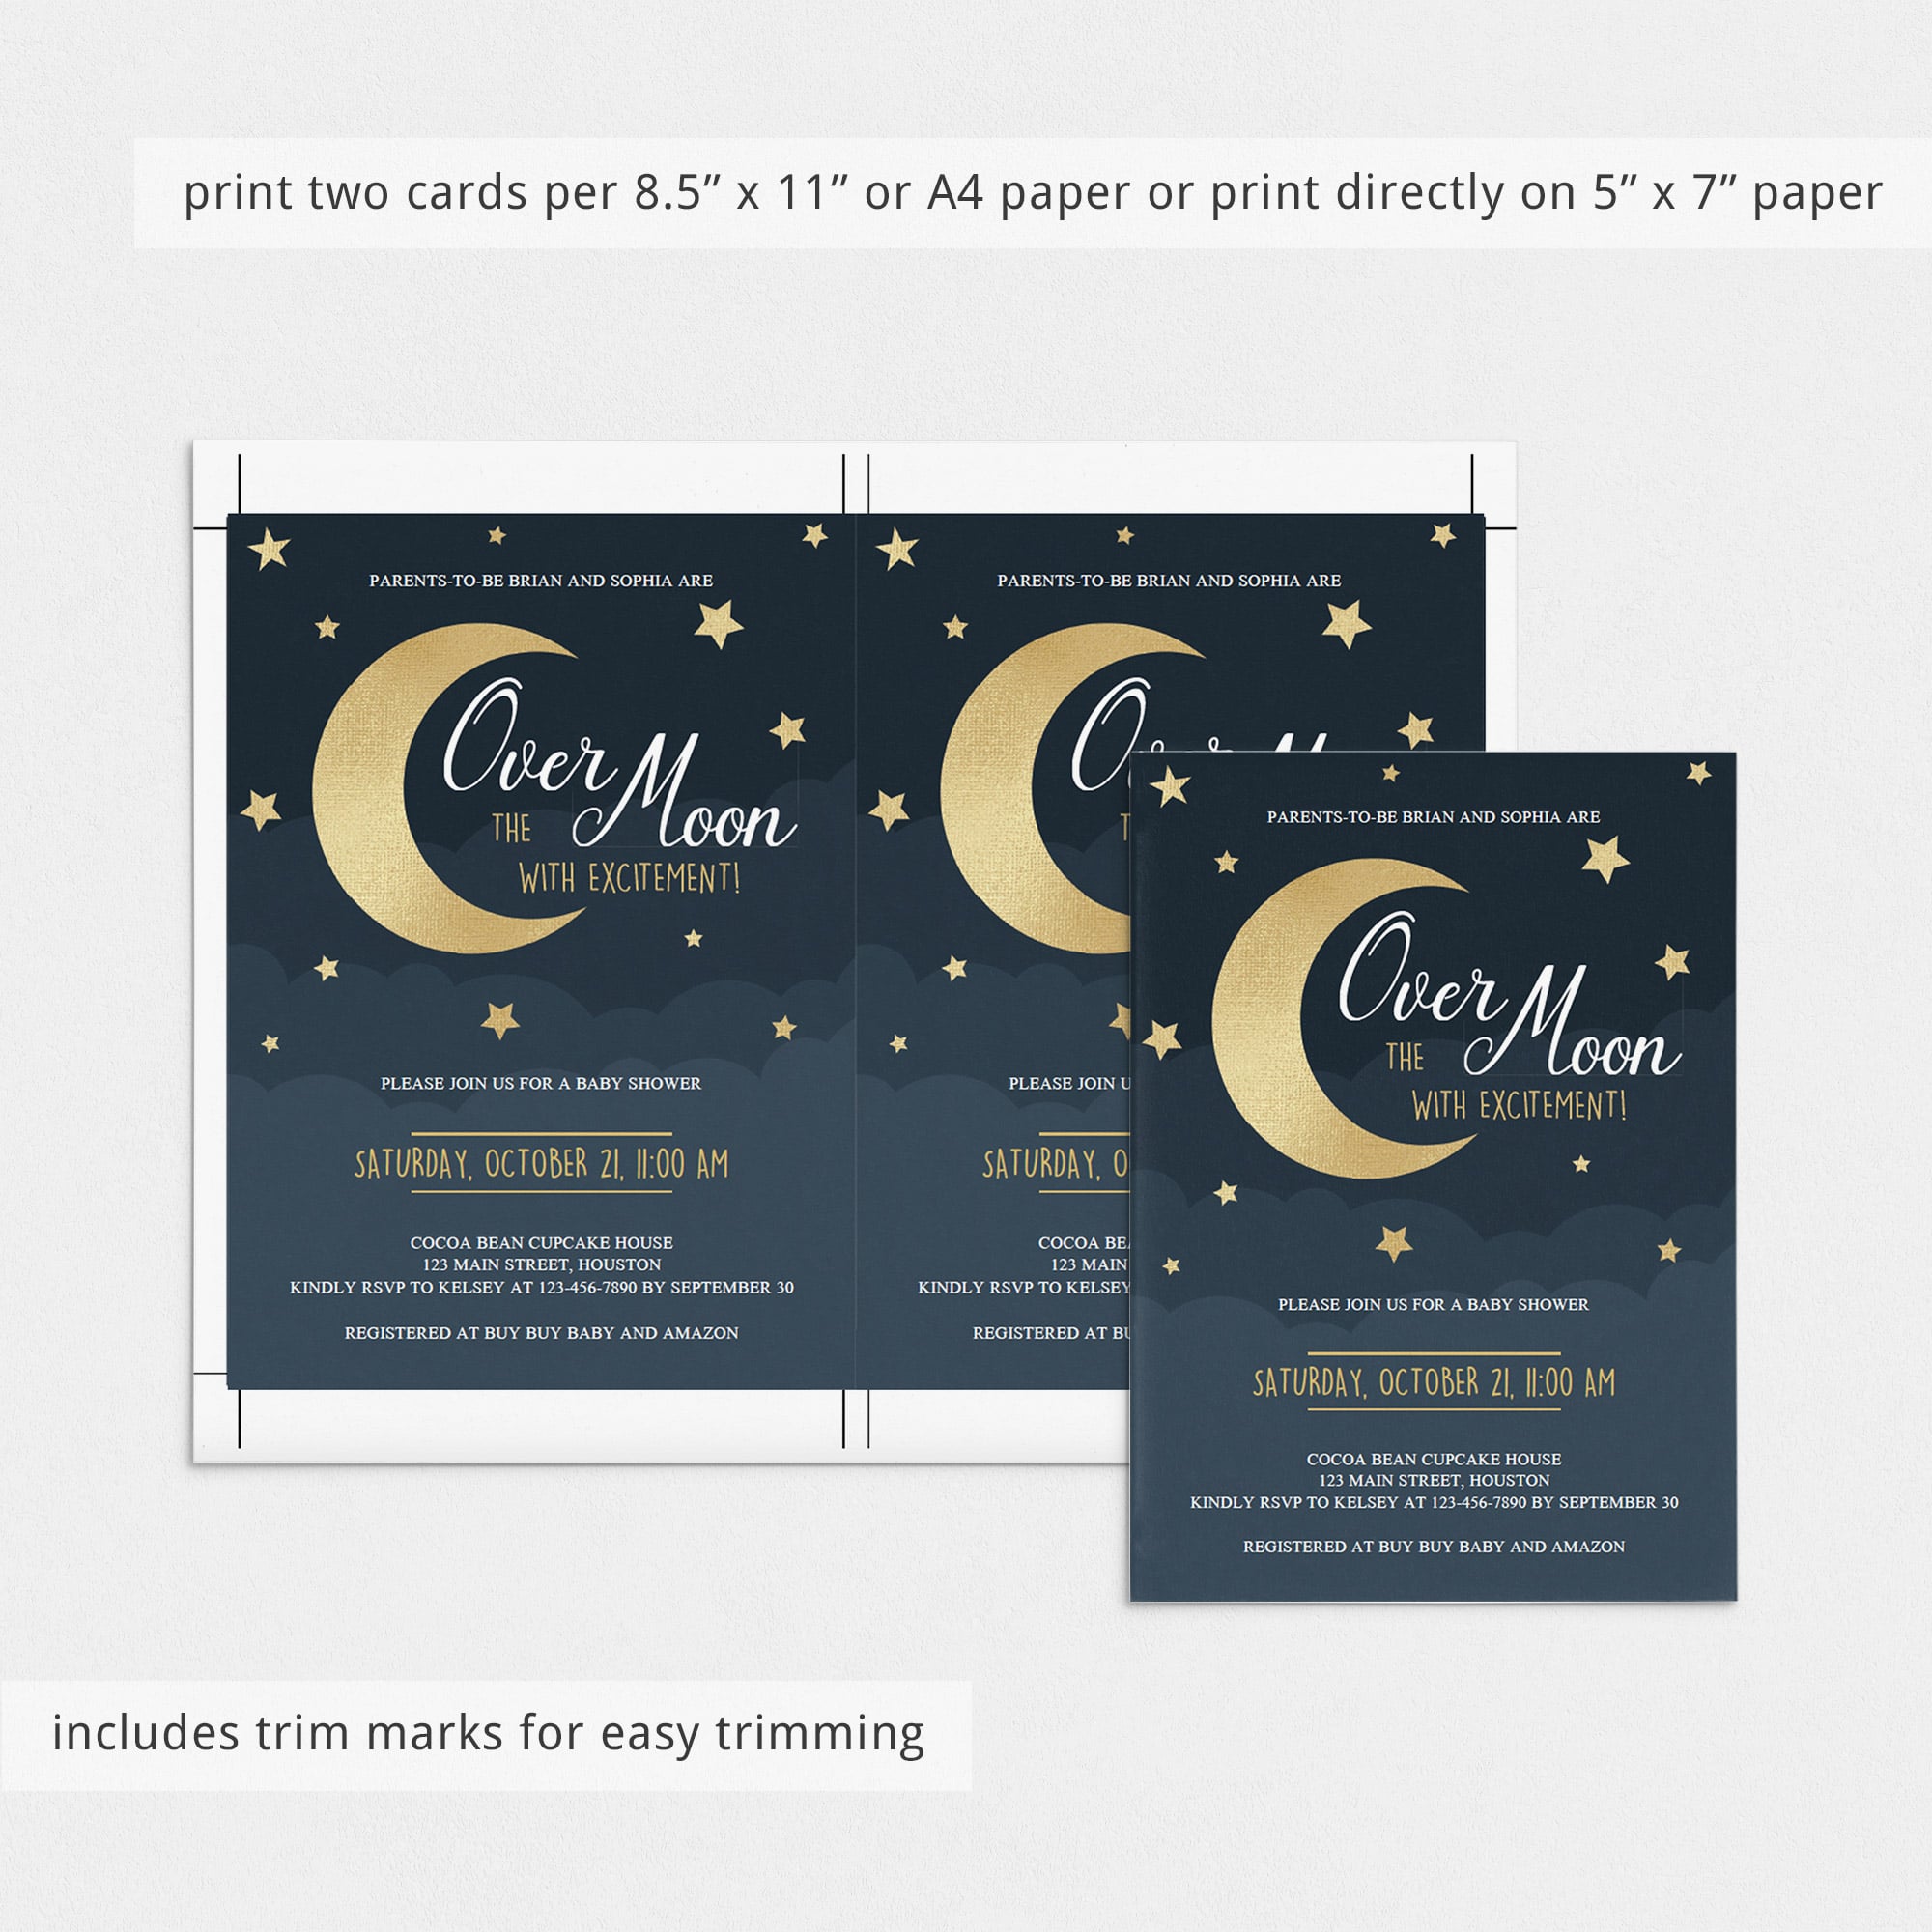 Personalized digital over the moon baby shower invitation by LittleSizzle